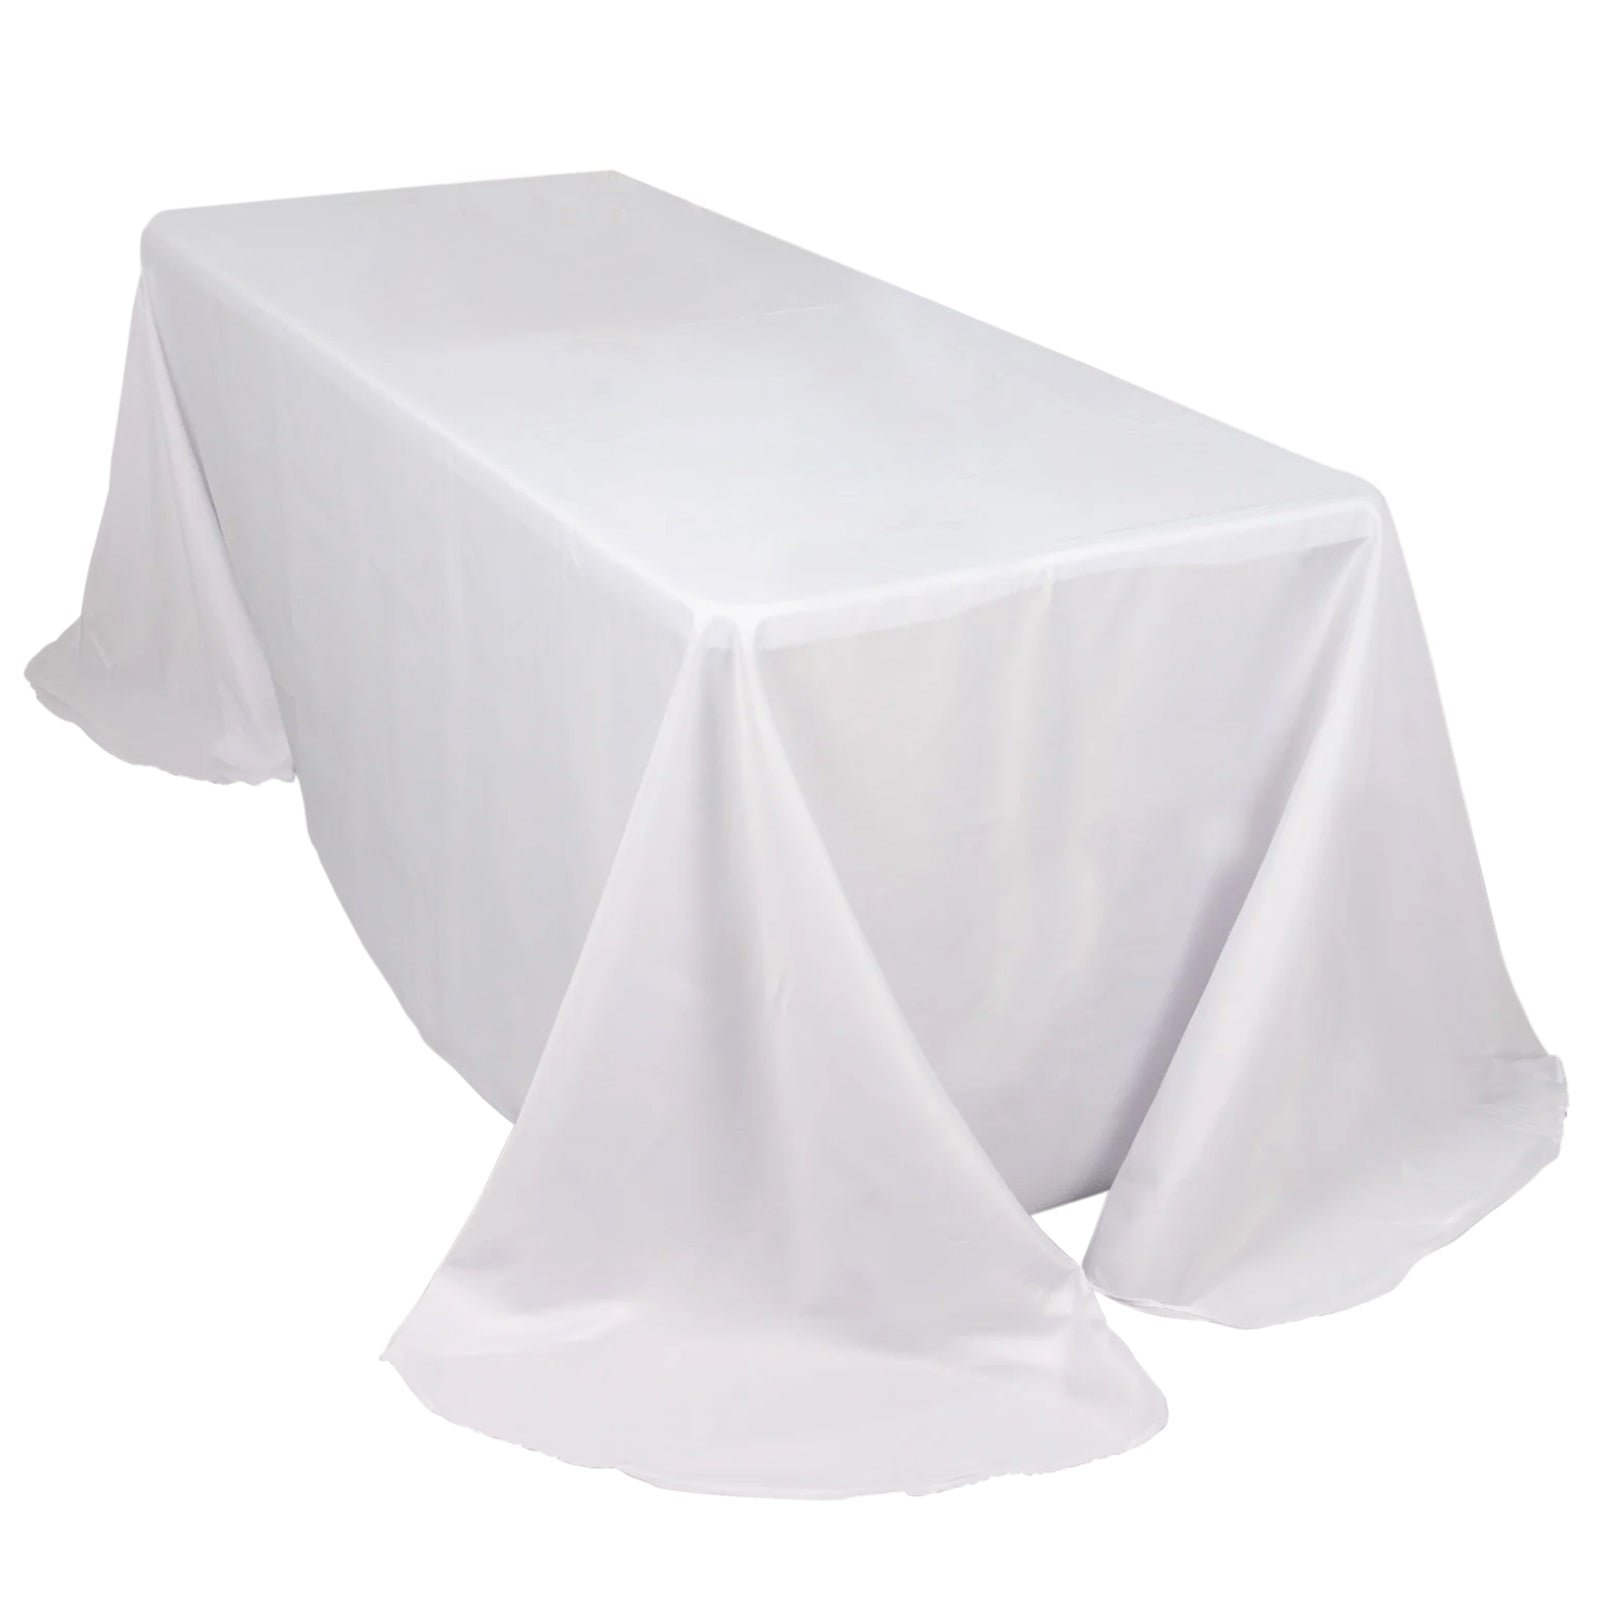 1-12 Spandex Fitted Banquet Folding Chair Cover Table Cloth